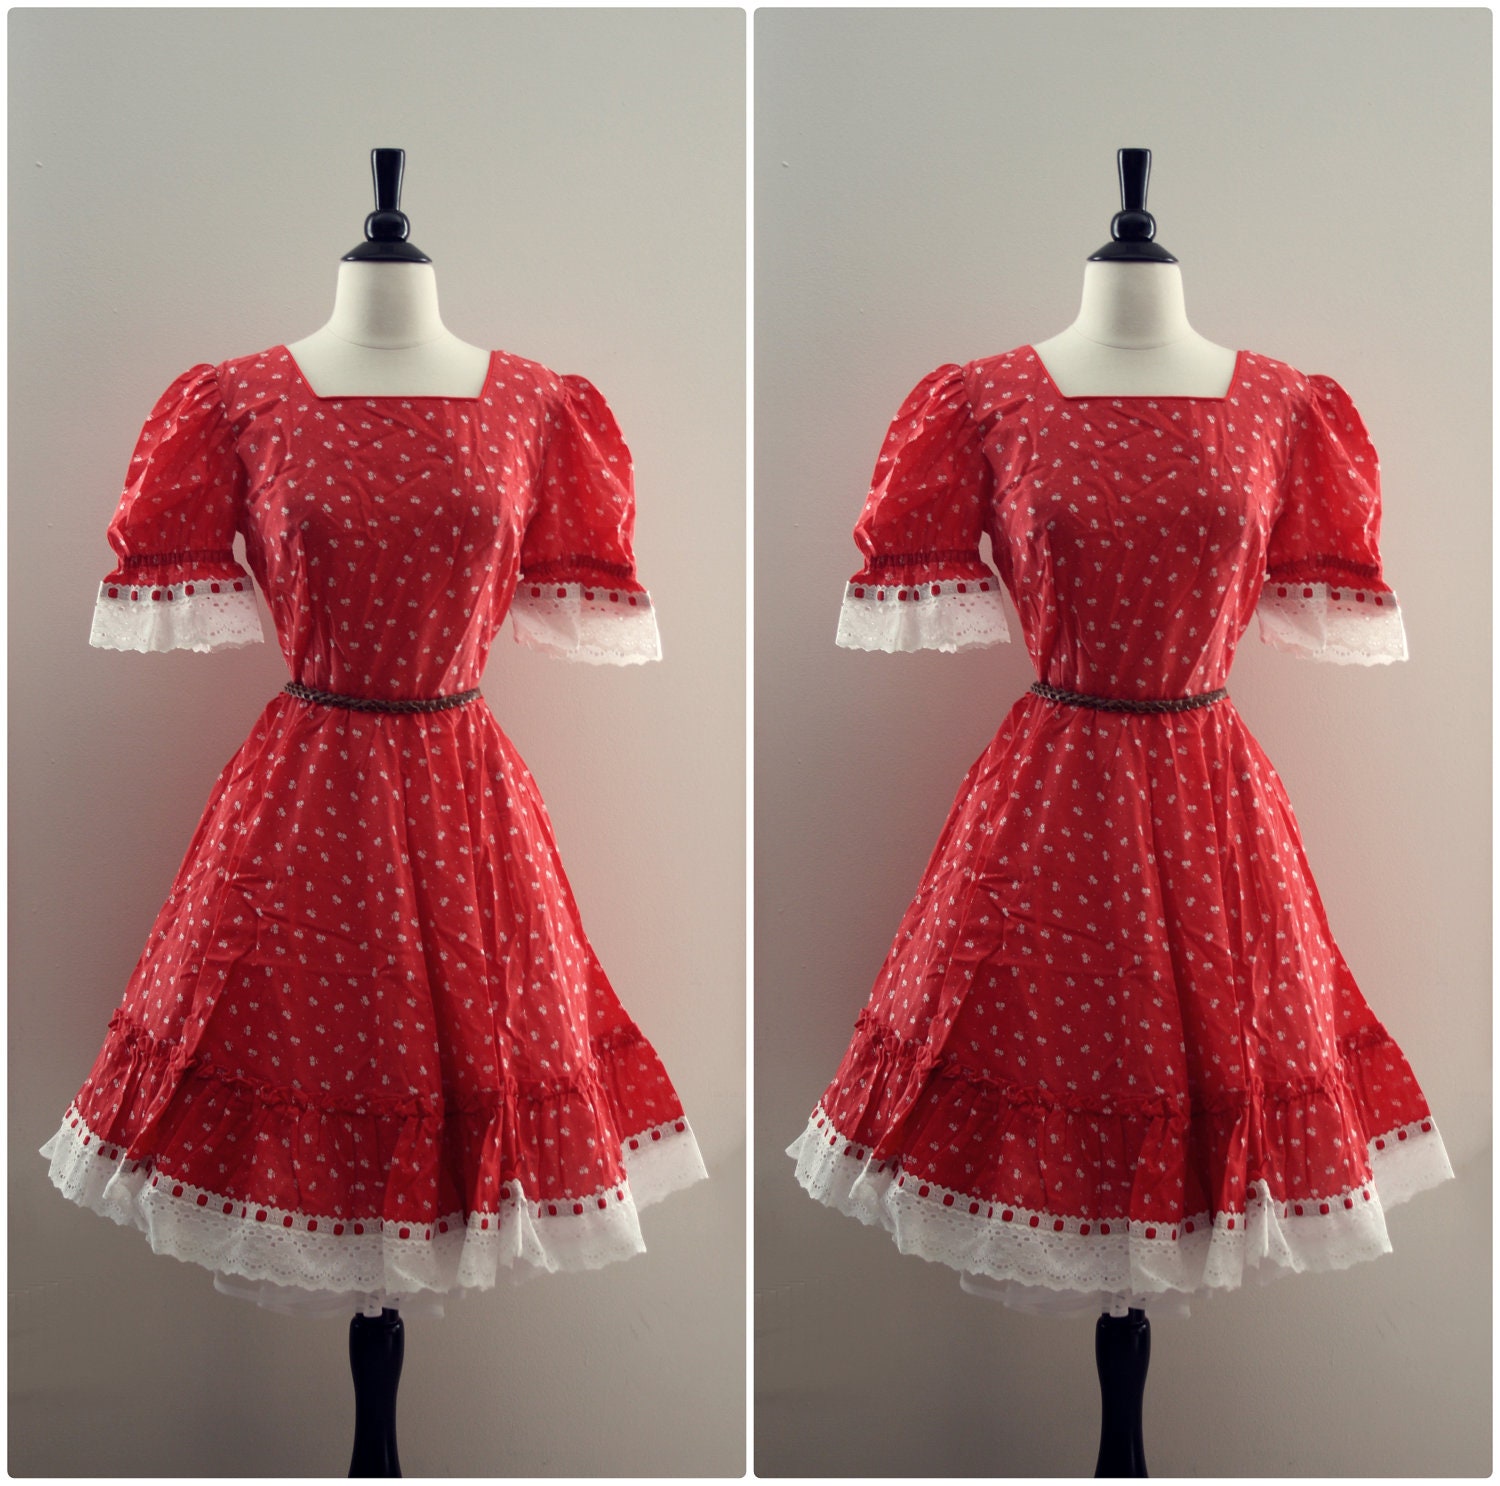 Vintage 1960s Square Dance Dress. Full Skirt. White and Red Floral Print. Eyelet Cotton, Metal Zipper. Size S/M